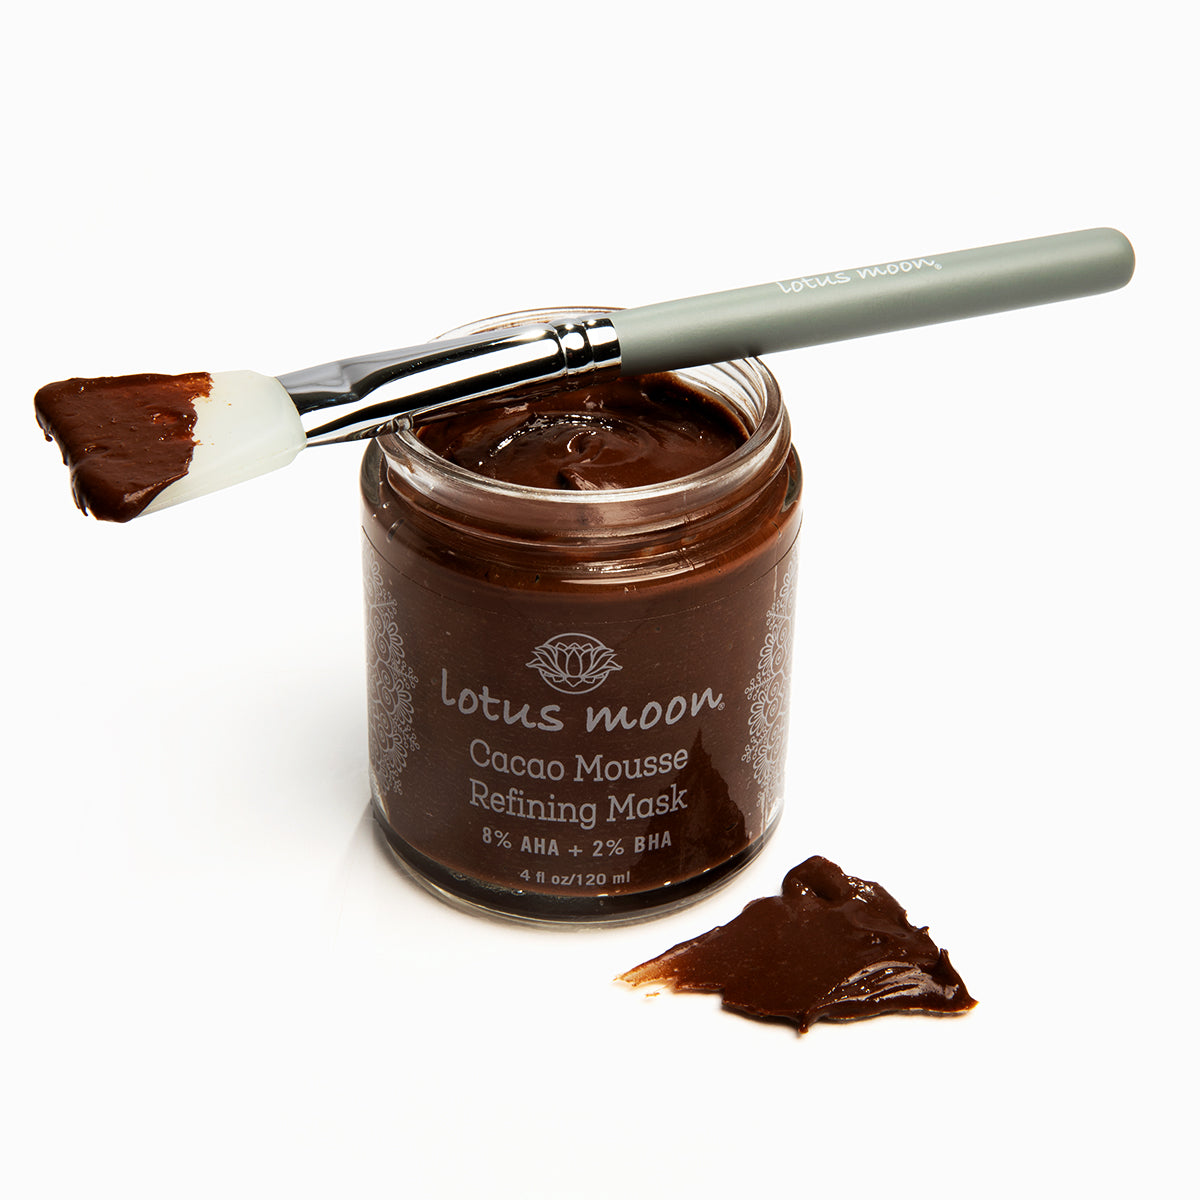 Chocolate active face mask with lactic and salicylic acids plus ingredients like cocoa, jojoba oil, cocoa butter and glycerin in addition to powerhouse extracts that boost your natural defenses against the look of wrinkles and sagging.